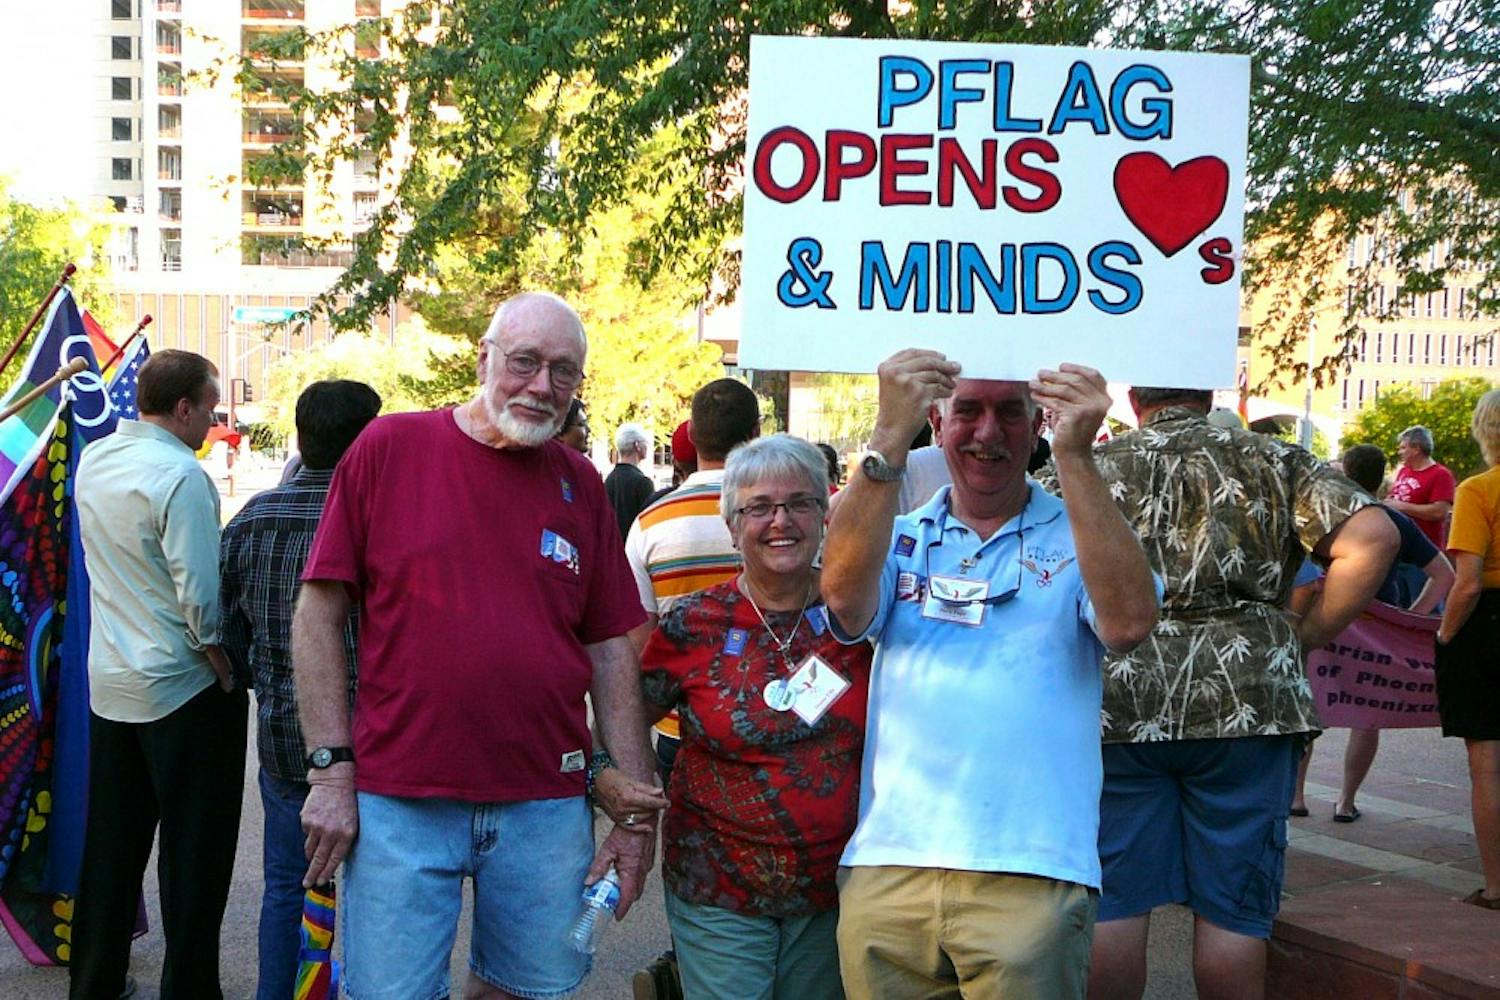 PFLAG president Al Ellie, left, his wife and PFLAG board member Donna Ellis, center, and PFLAG supporter Dave Pape, right, at a rally in downtown Phoenix.